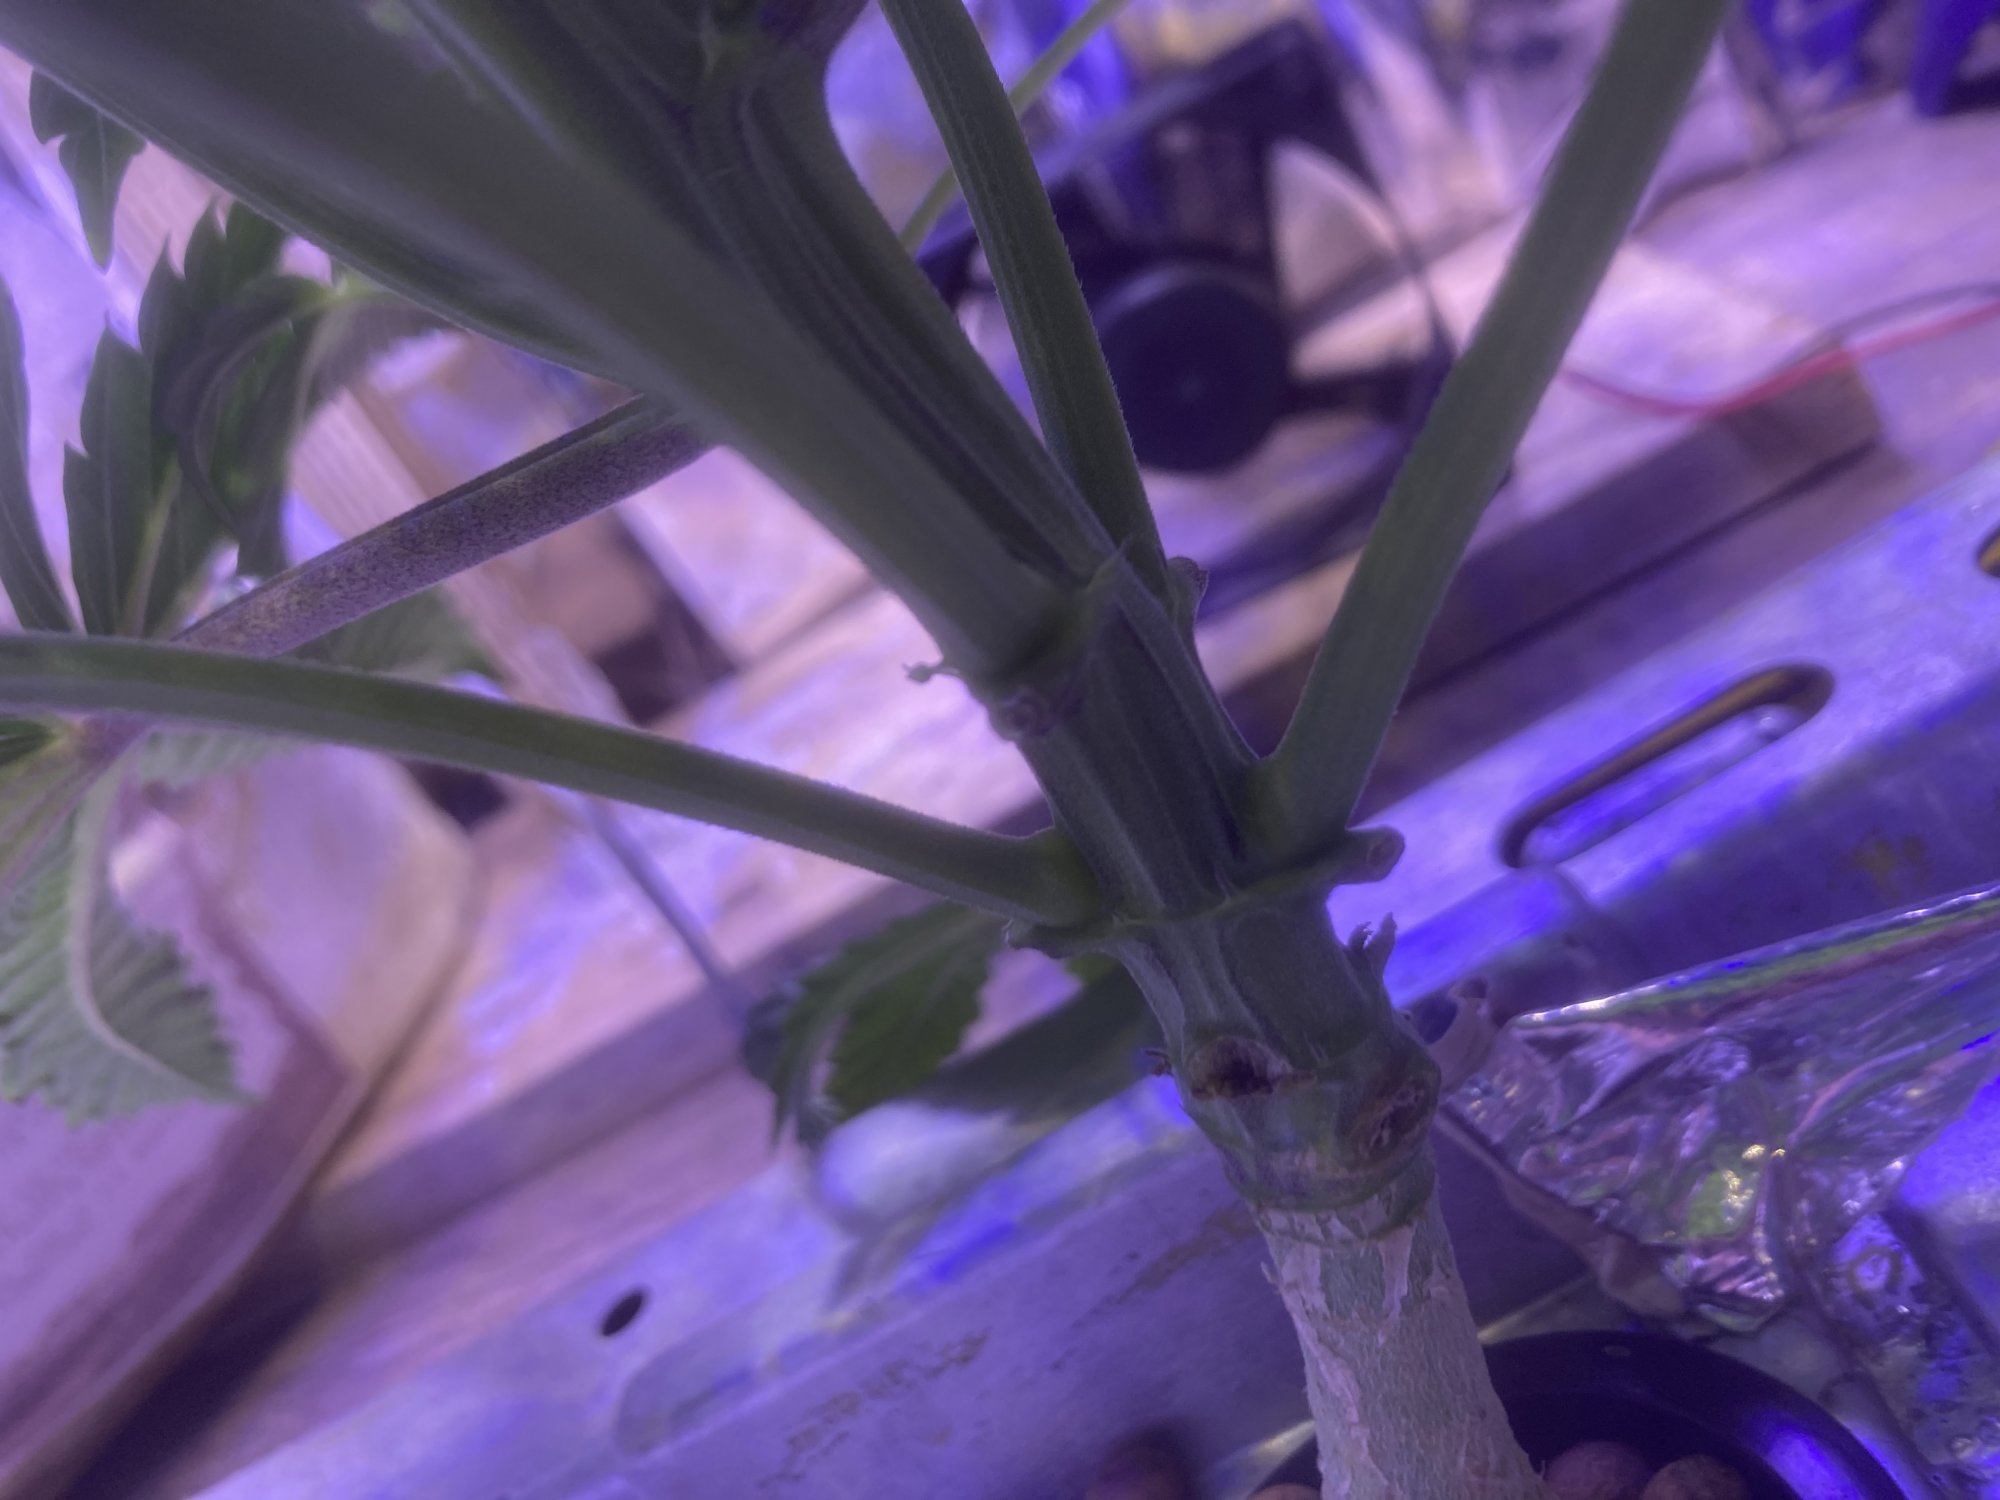 Root rot issues may have turned plant